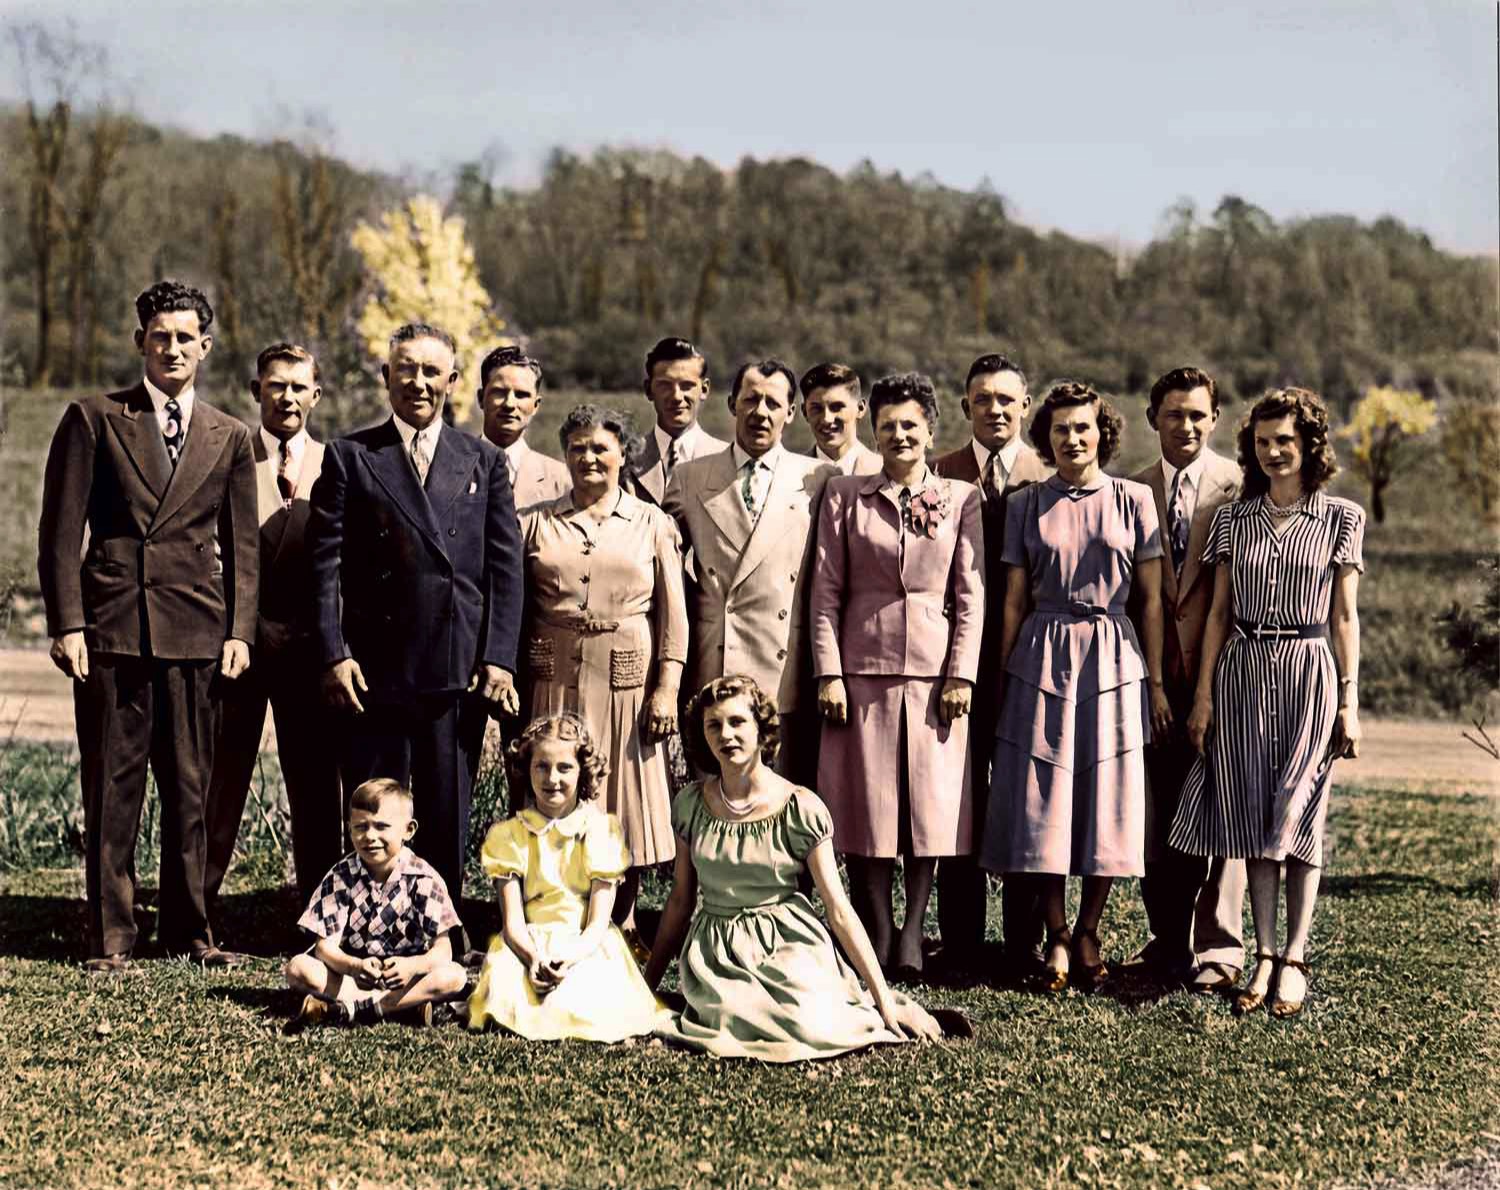 A family gathering, colored version of an original black and white